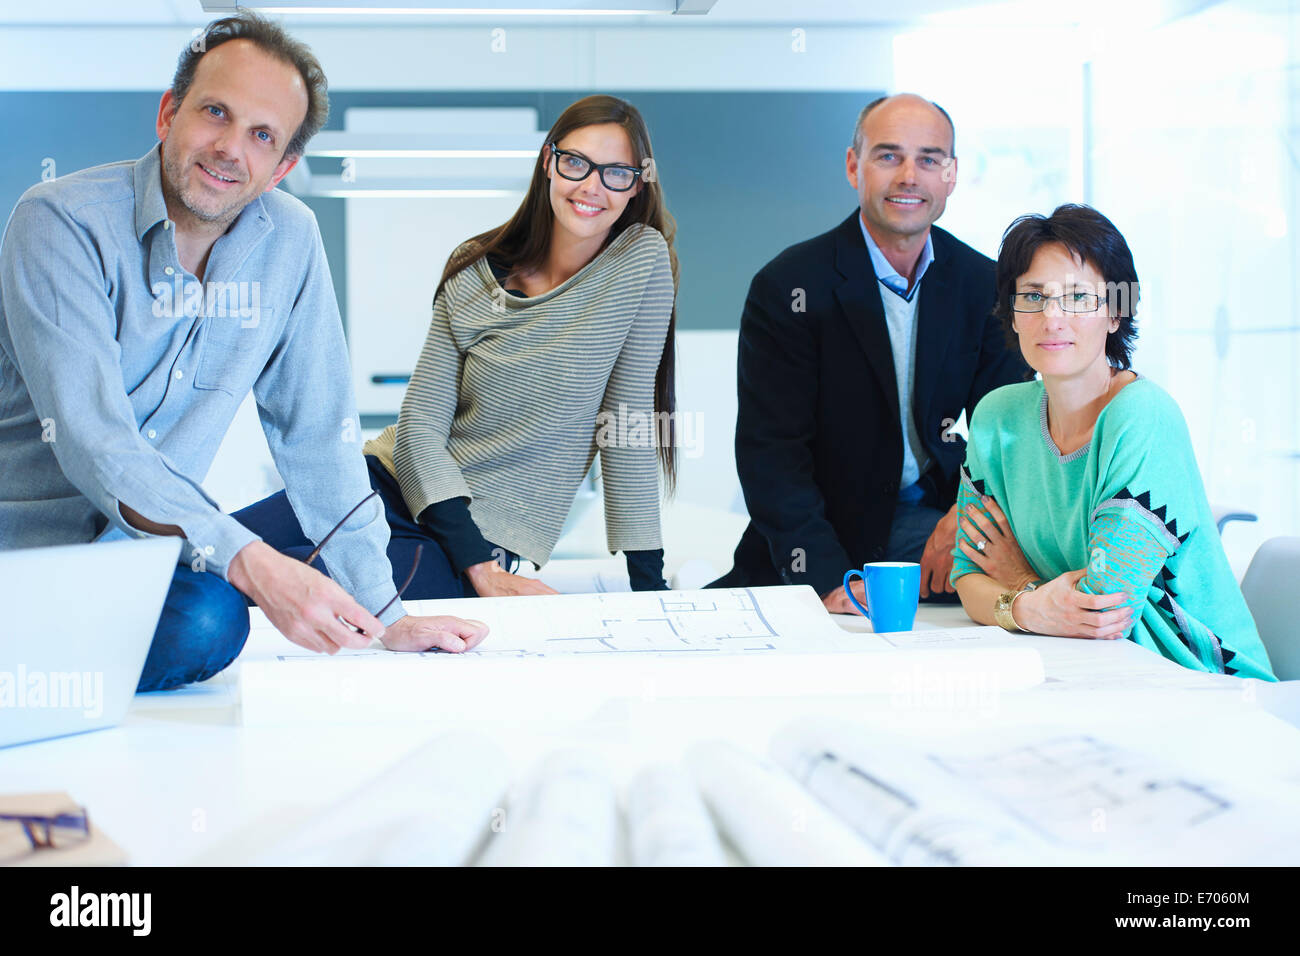 Portrait of group of business people Stock Photo